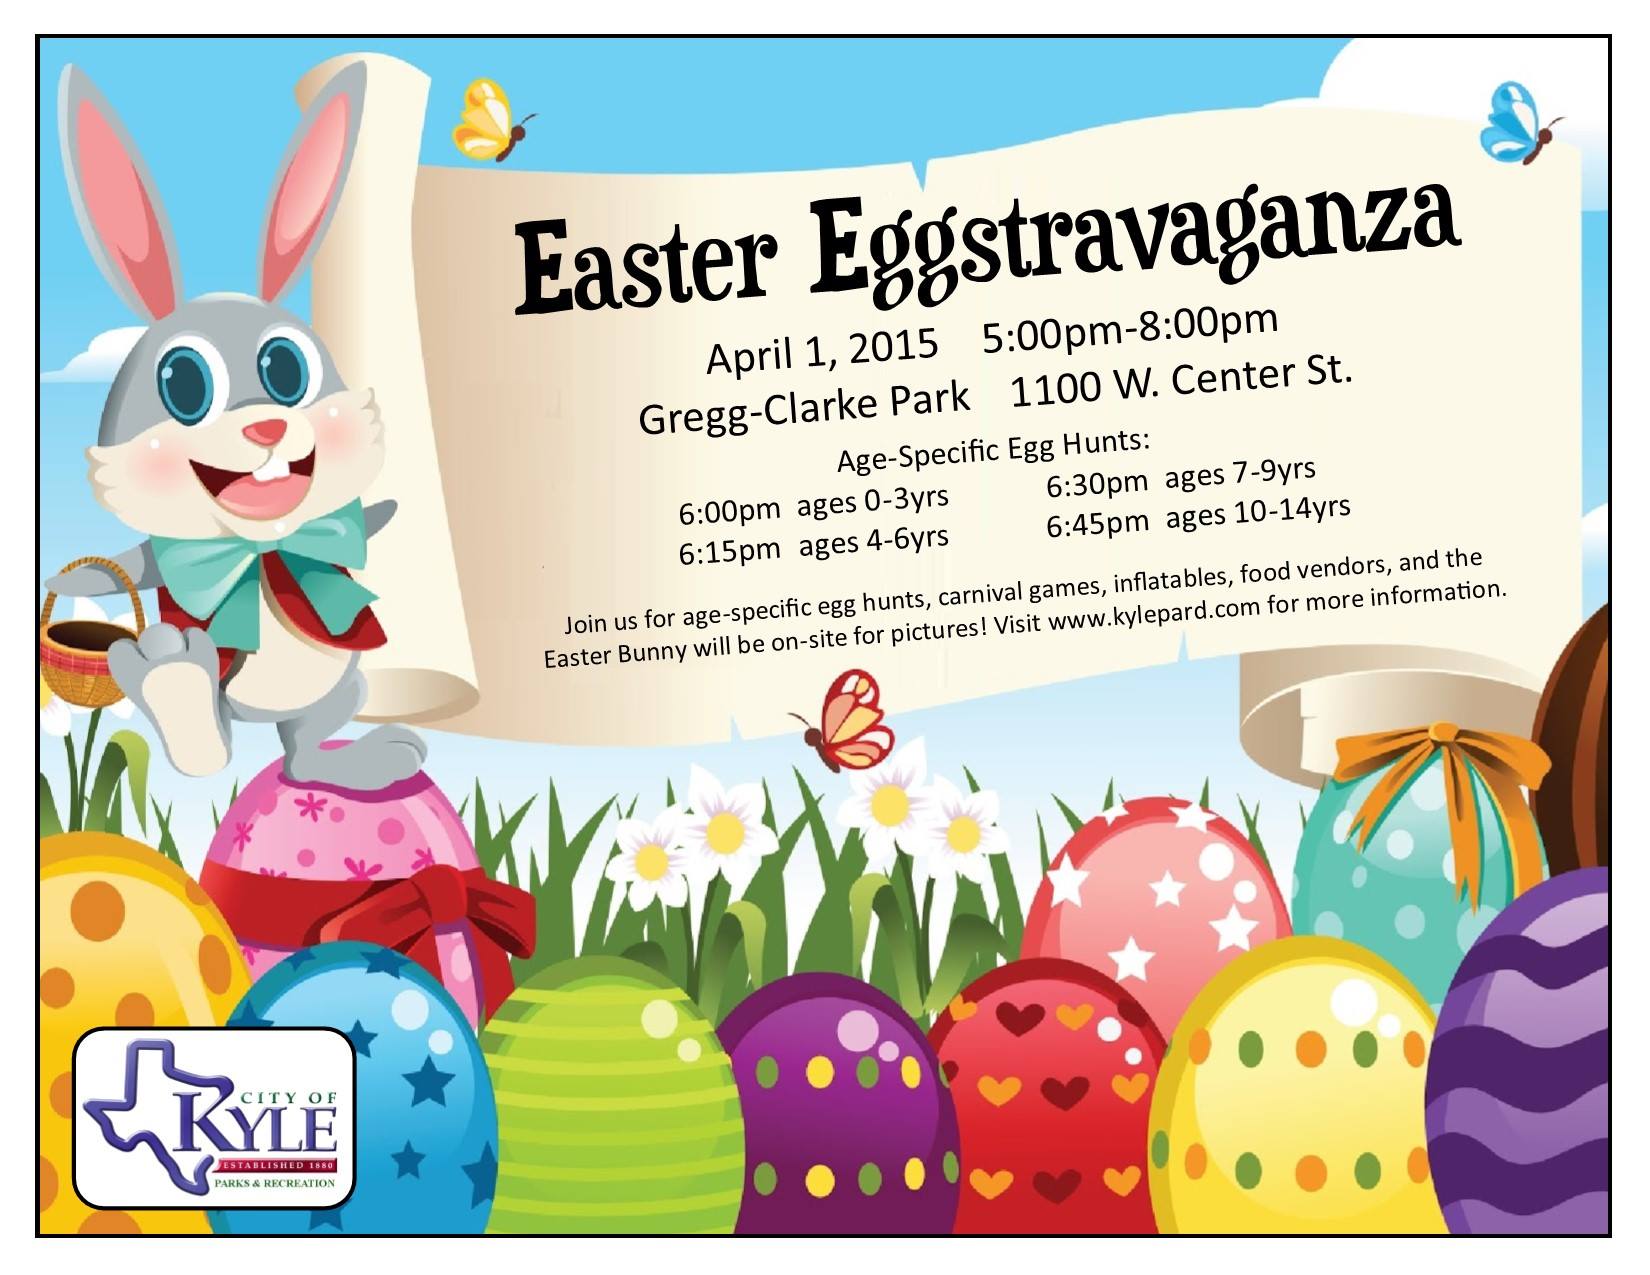 City of Kyle Easter Eggstravaganza 2015